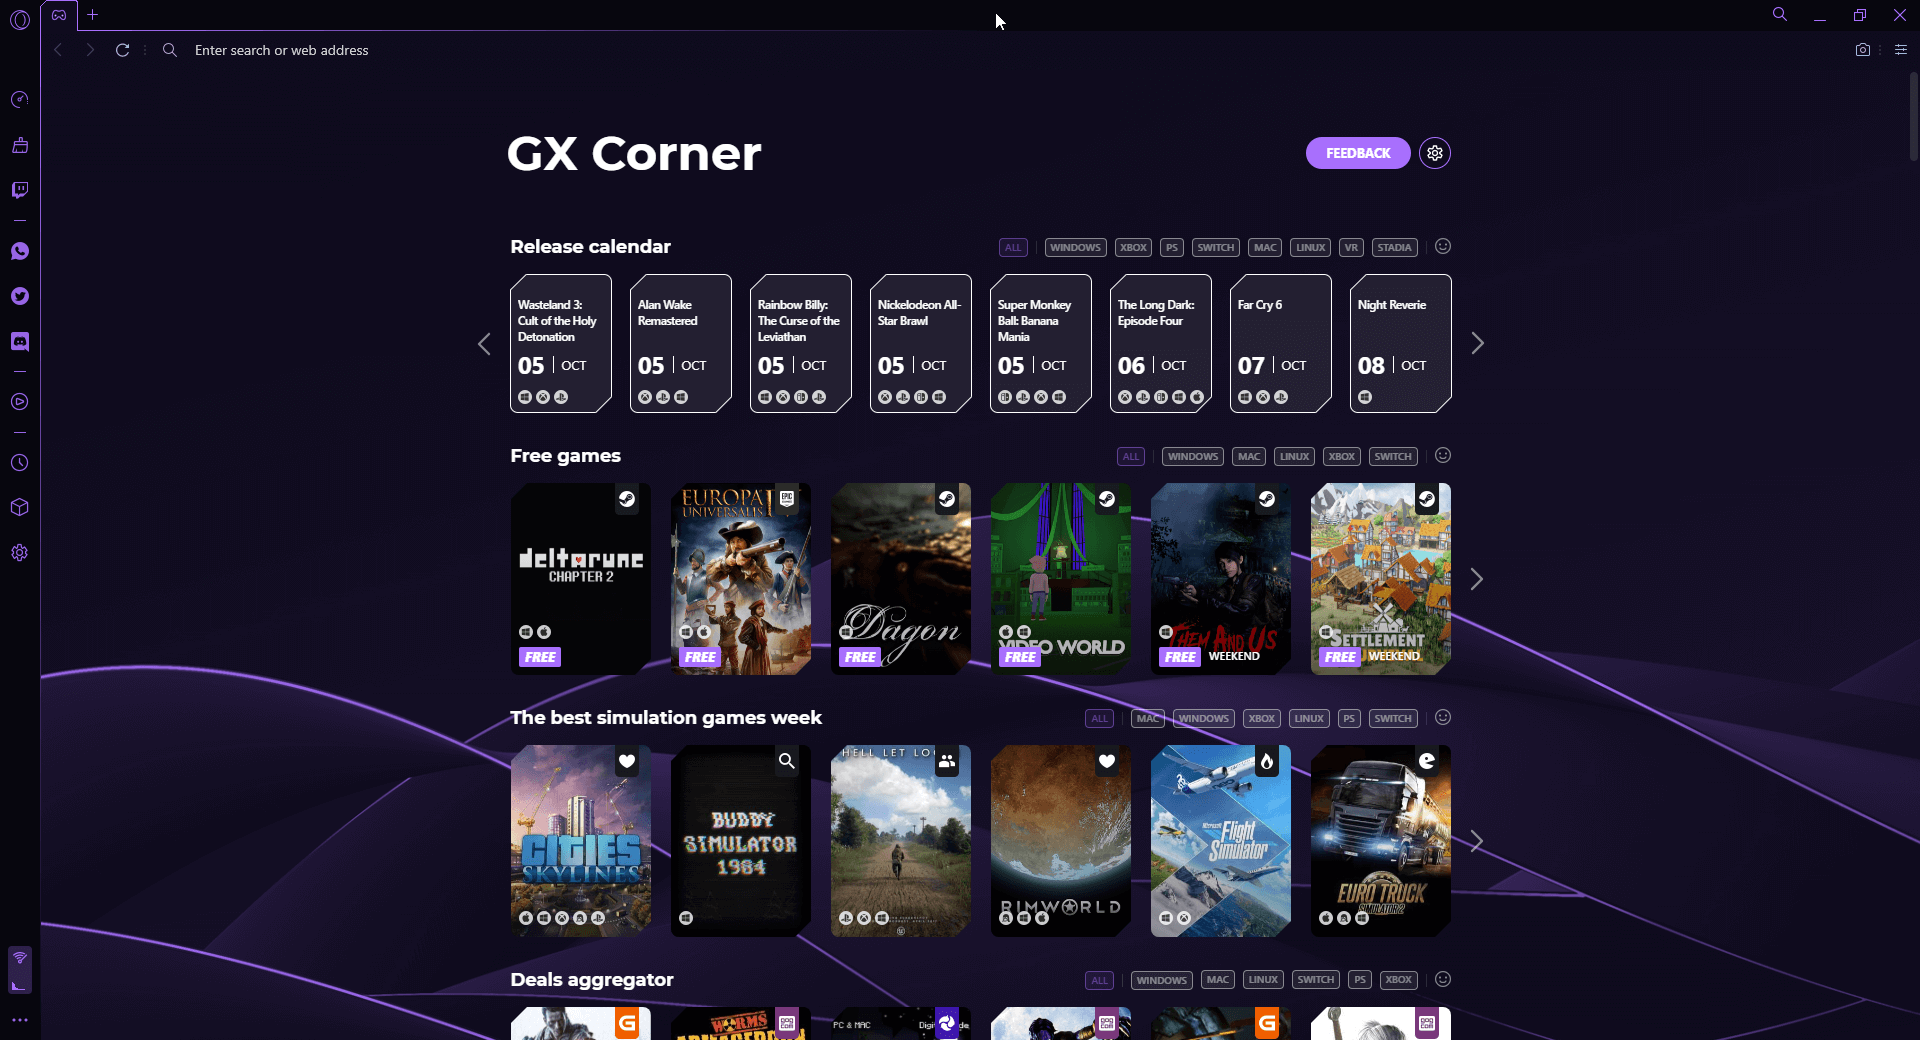 Opera GX: Overview page for gamers